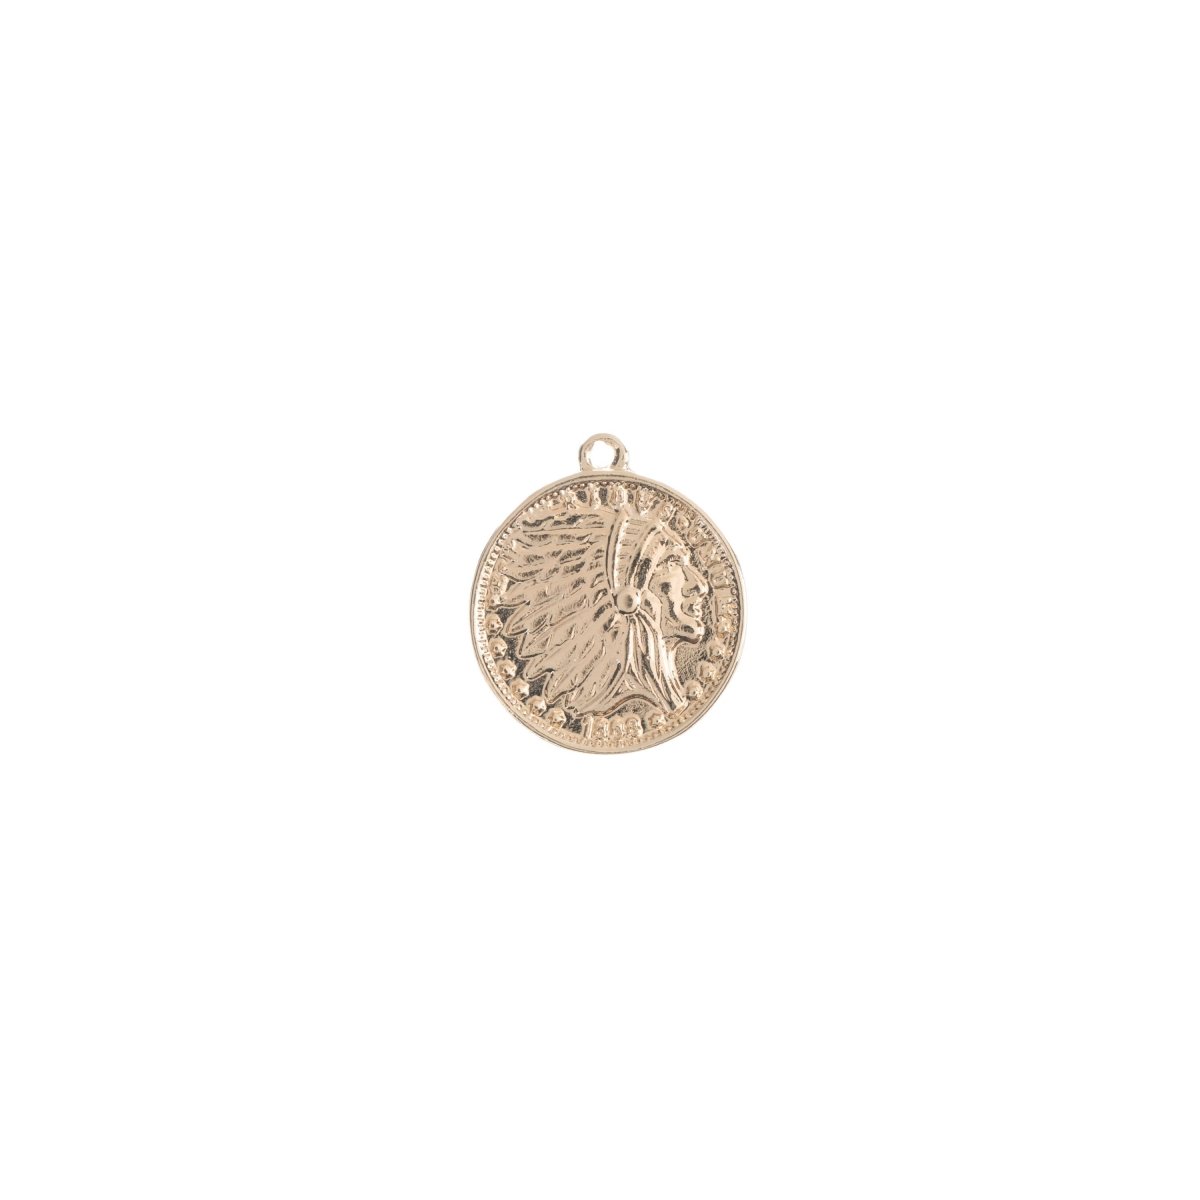 Dainty 18k Gold Filled Rustic Indian Chief Head with Full Headdress Antiqued Coin Charm Pendant Jewelry Supply C-240 - DLUXCA